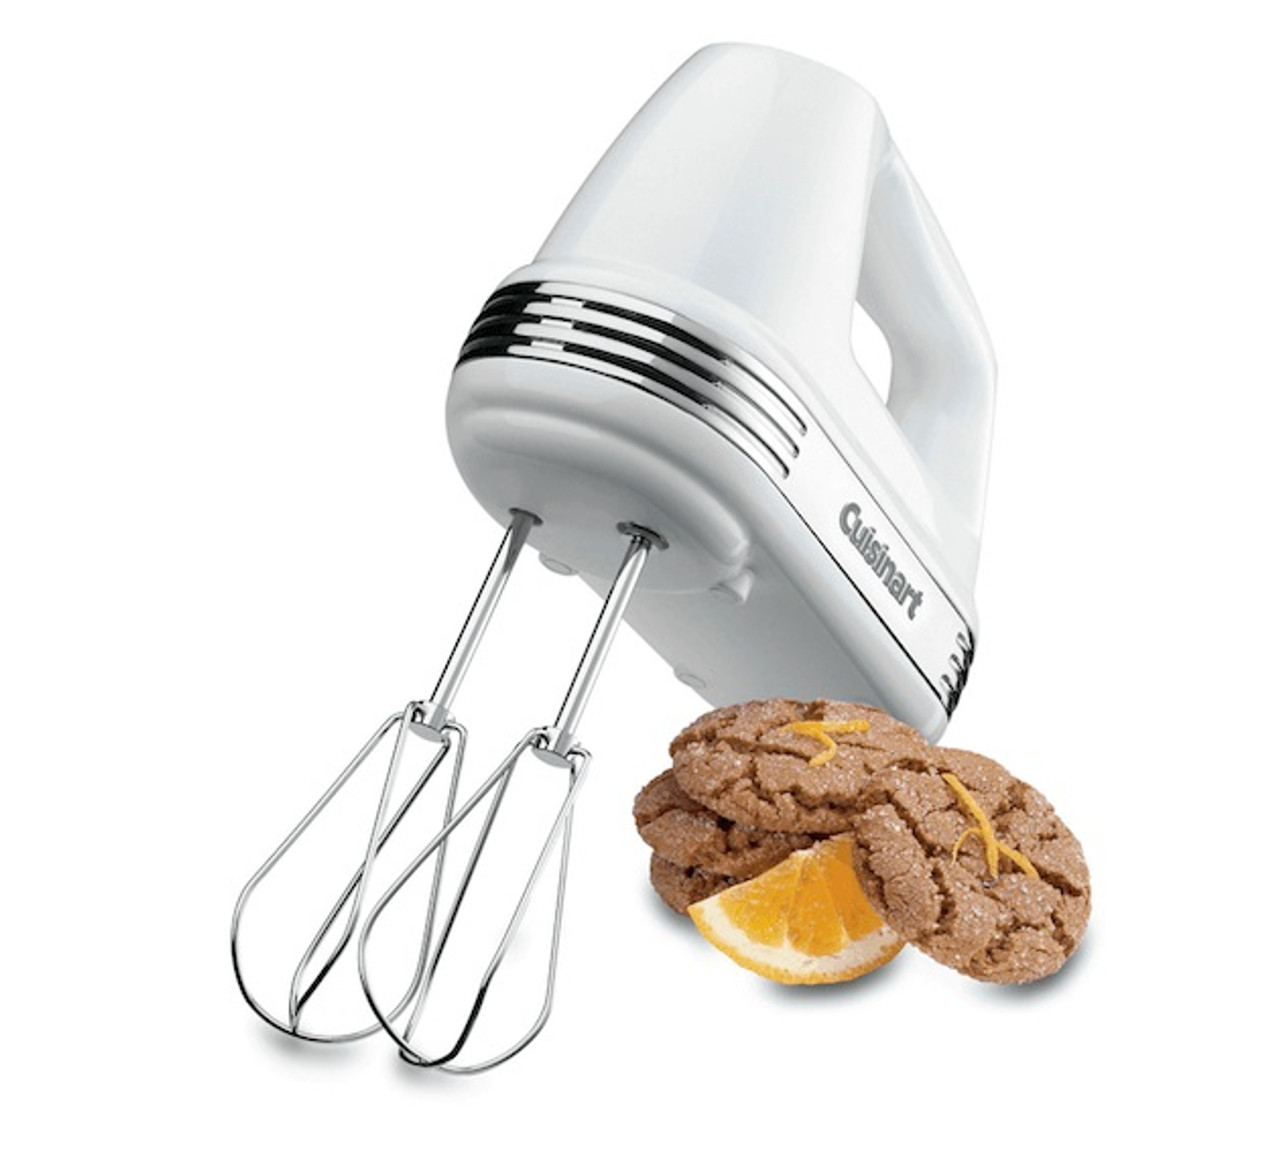 Cuisinart Power Advantage 9-Speed White Hand Mixer with Recipe